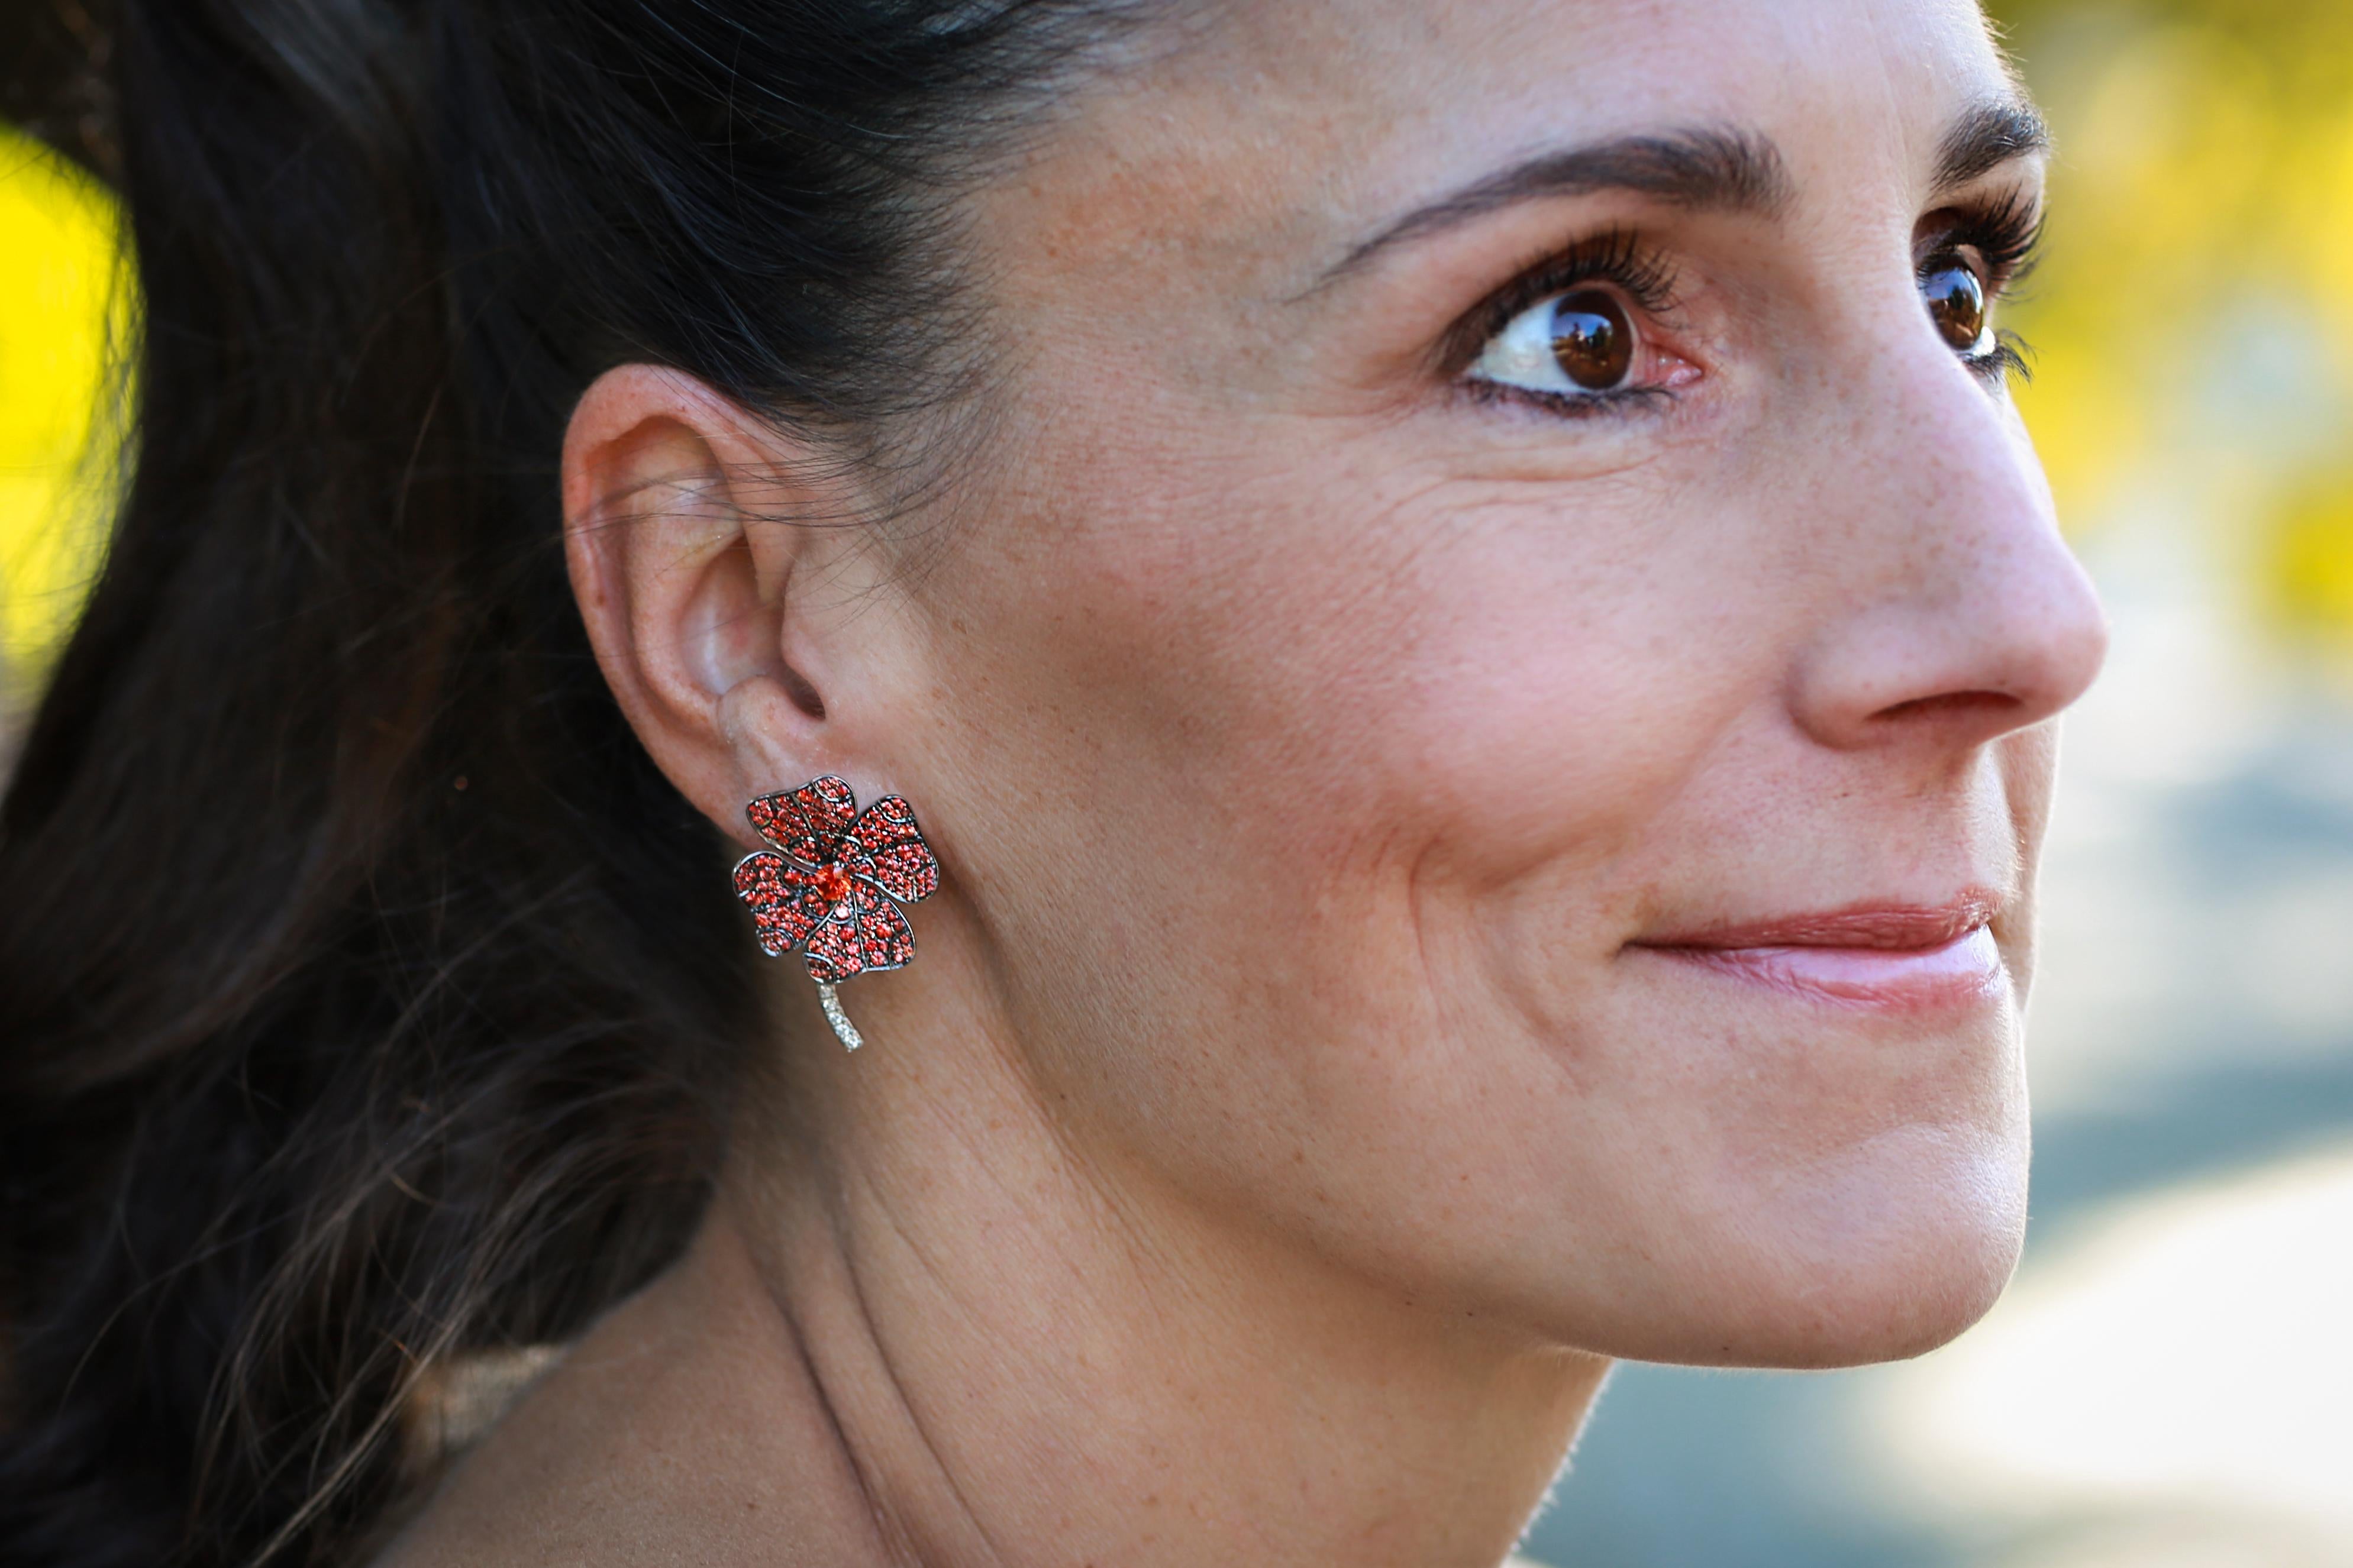 This beautiful Clover Earrings go very well with your chosen attire, whatever it will be. The crisp, fancy Orange Sapphires are attractive and held back at the same time. If it is a Dinnerparty or just picking up the kids from school - those